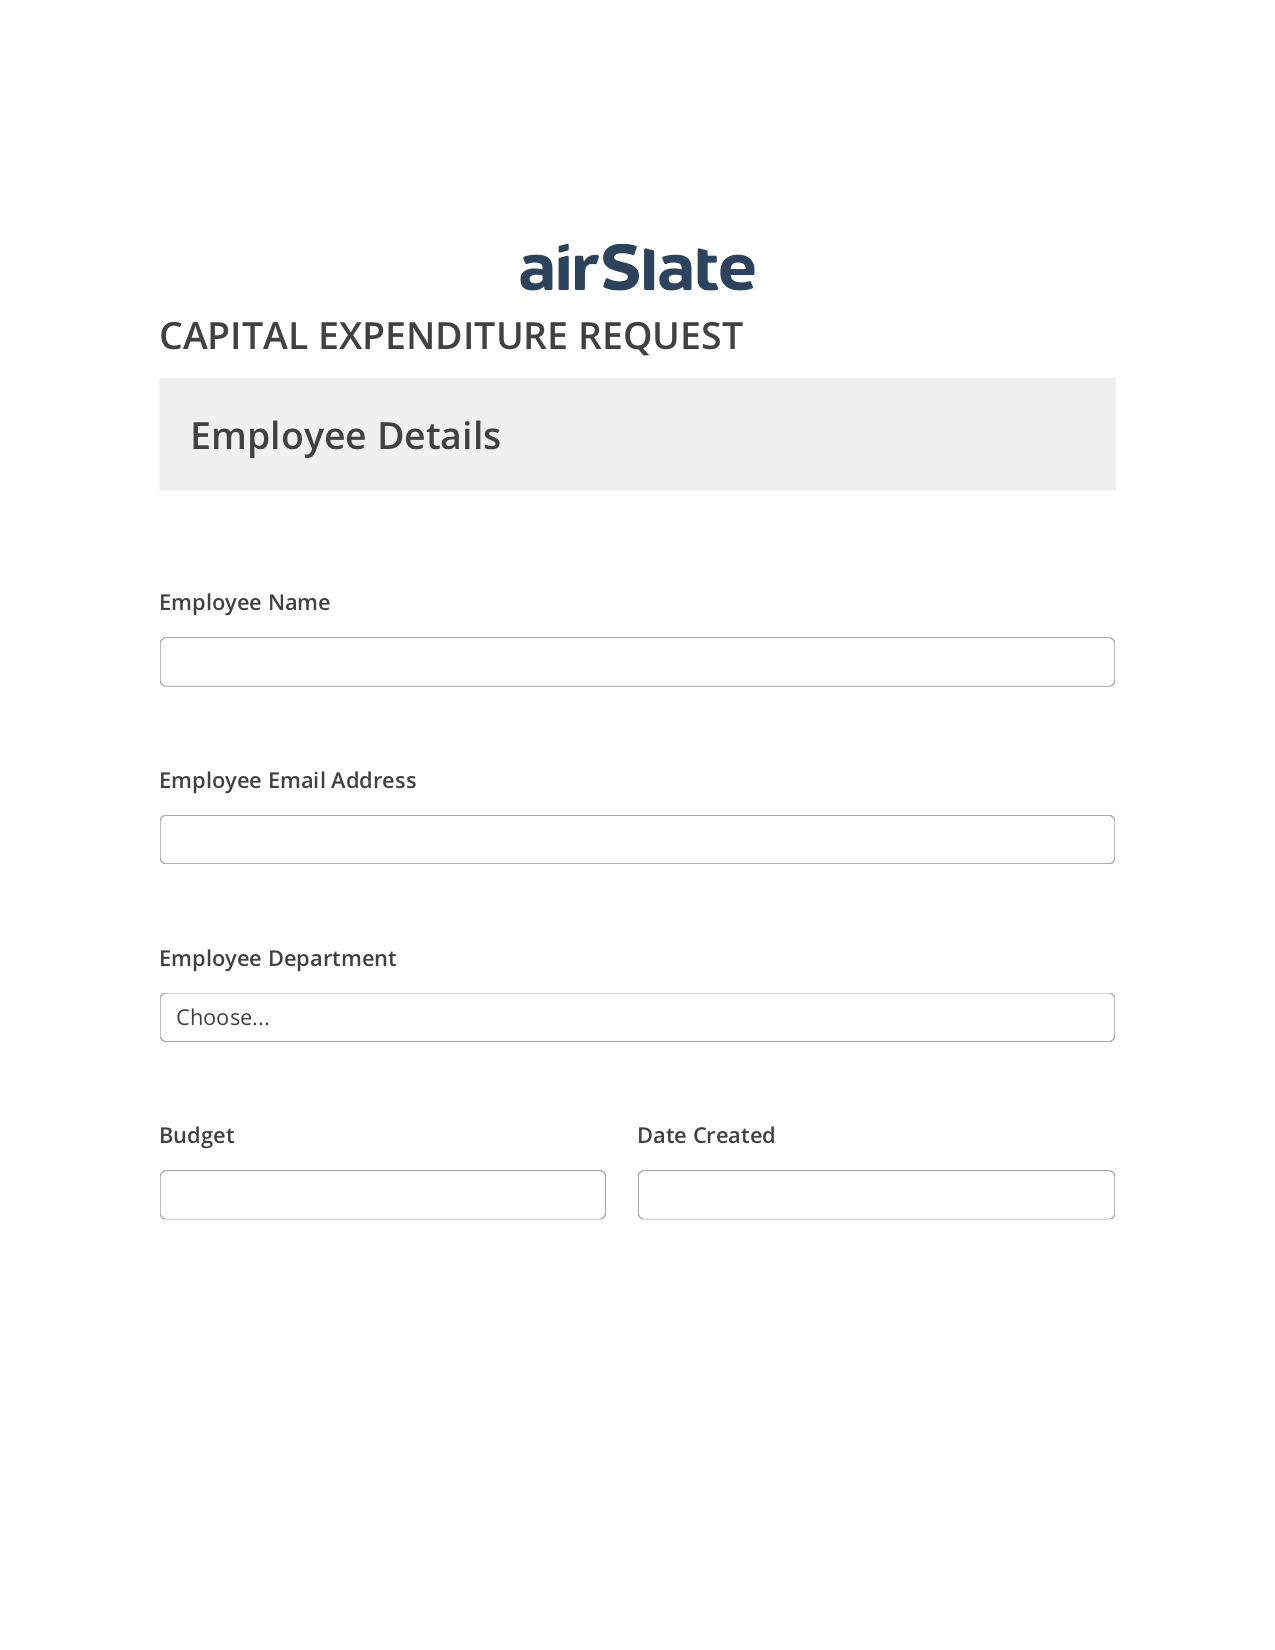 Capital Expenditure Request Approval Workflow Pre-fill Slate from MS Dynamics 365 record, Update Audit Trail Bot, Archive to OneDrive Bot